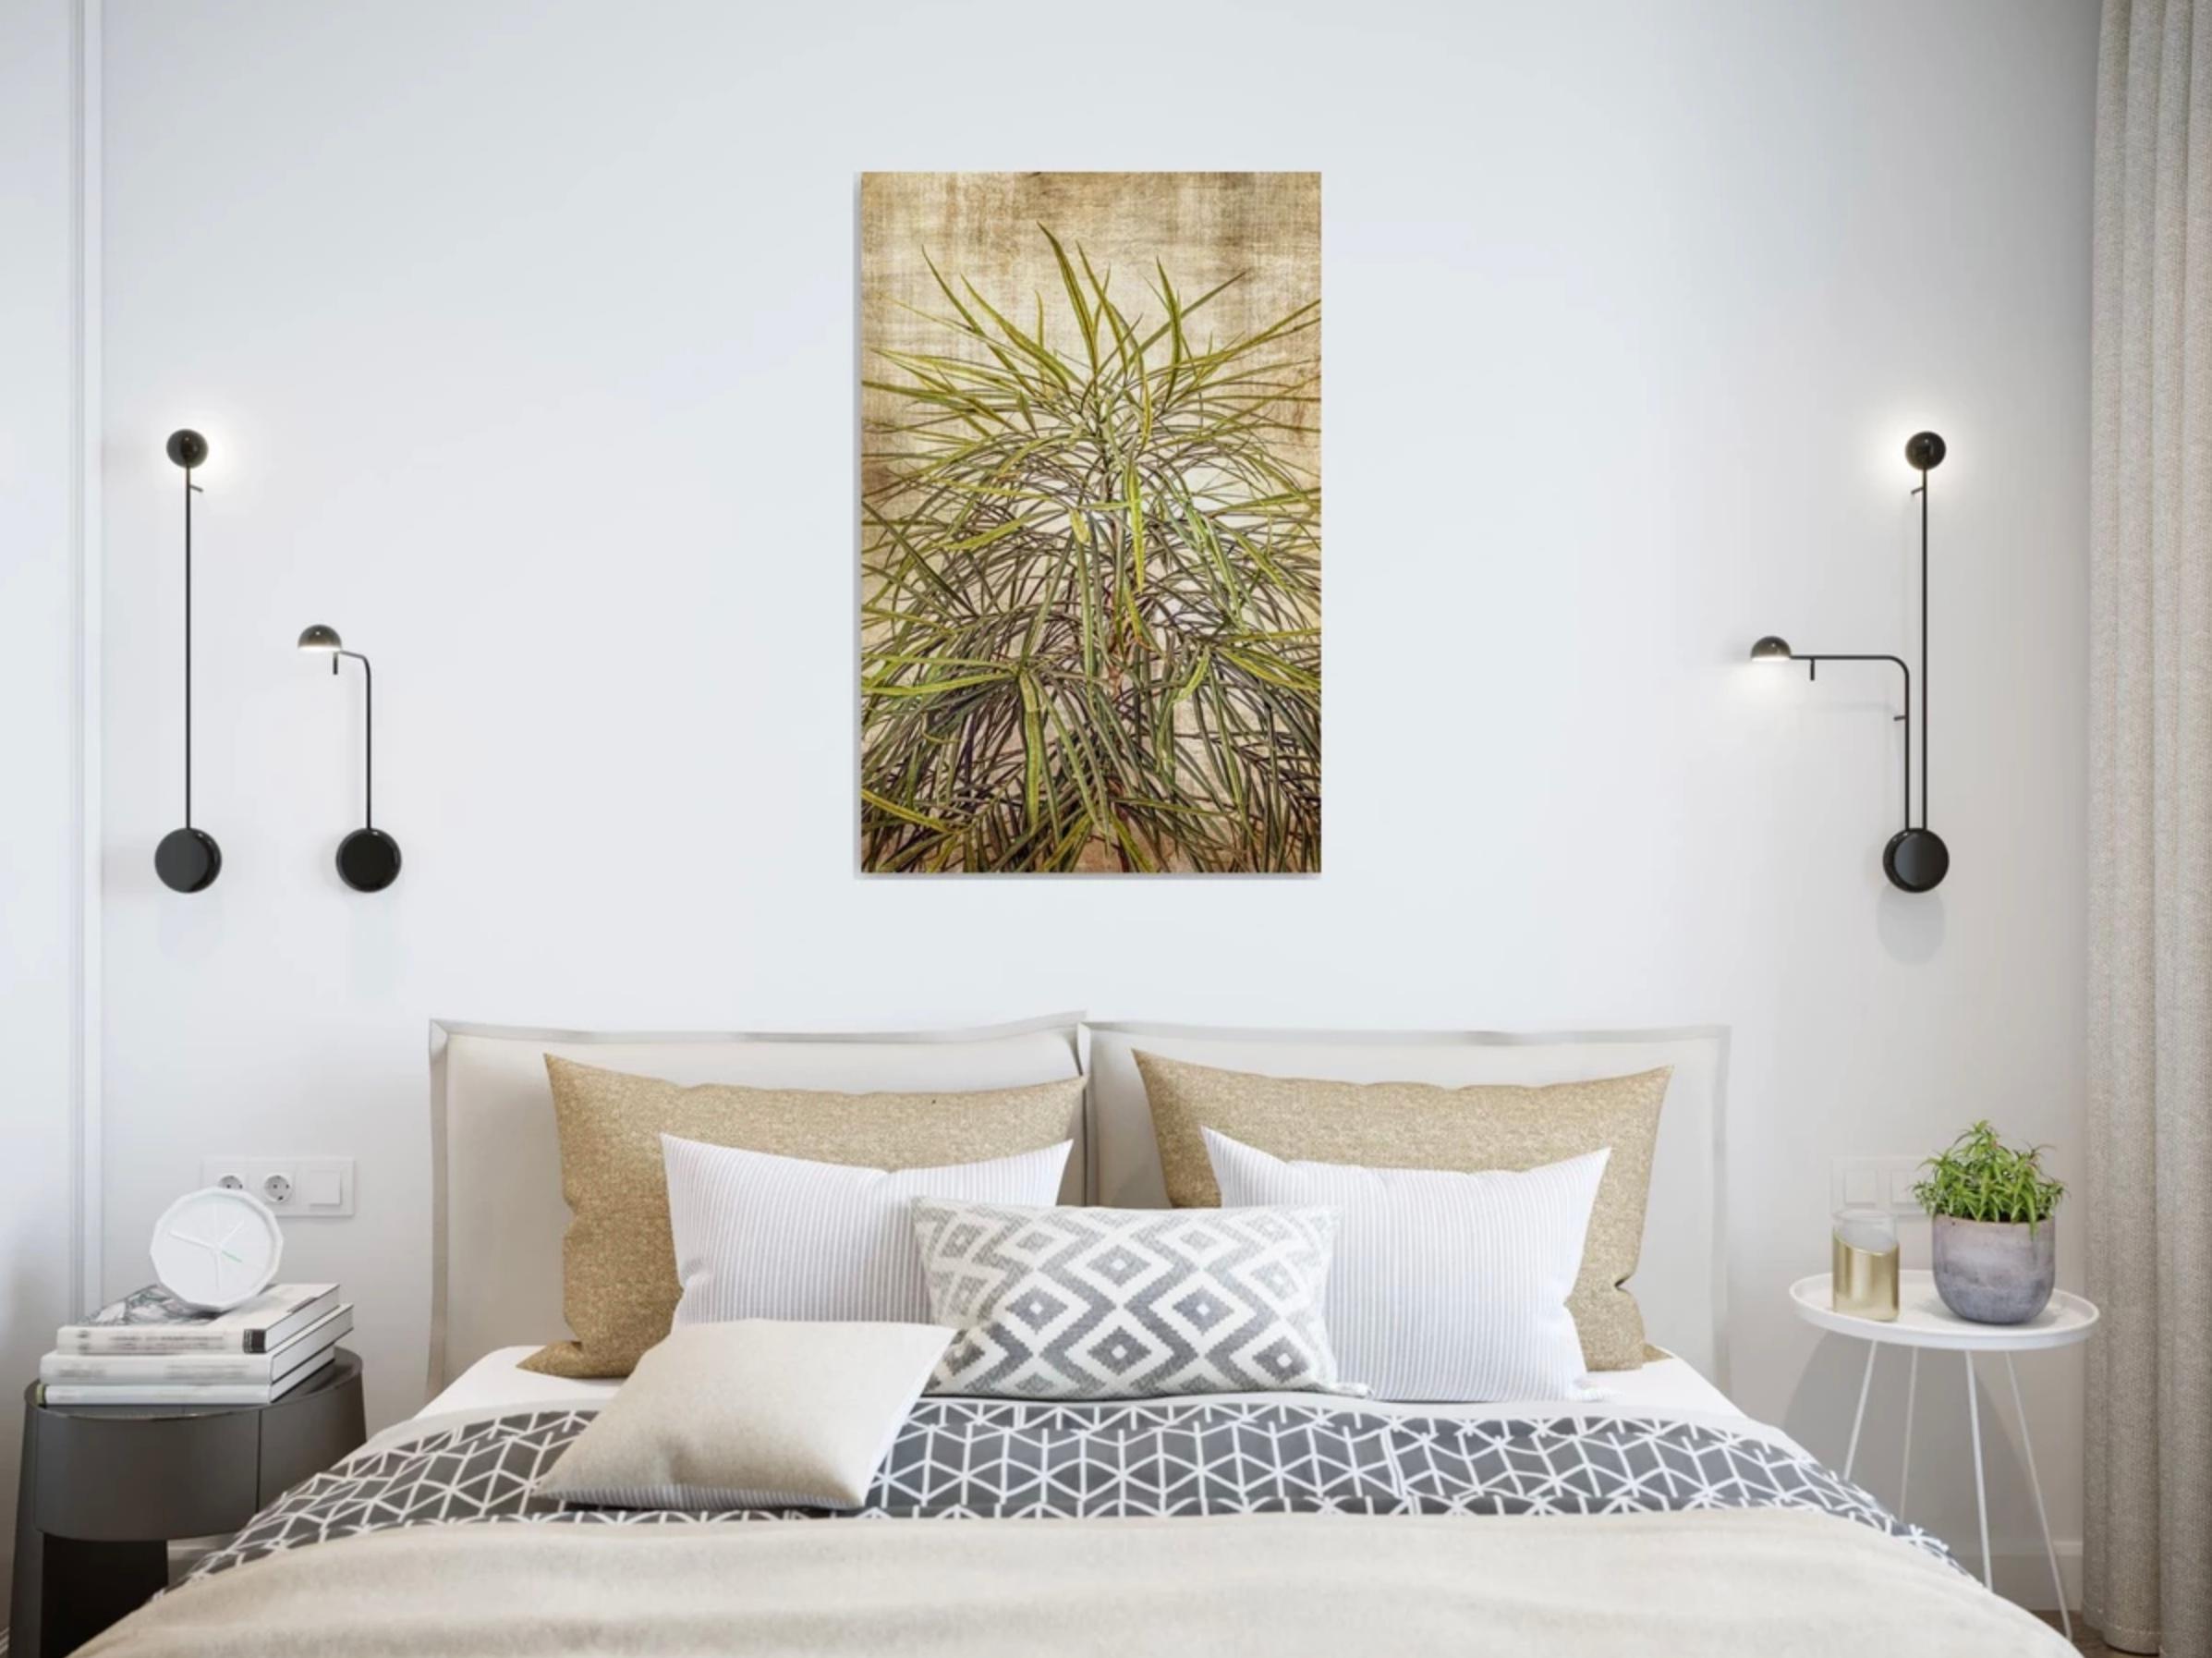 Archival pigment ink print on canvas, edition of 15 - artwork can be shipped in a tube or framed in a crate
